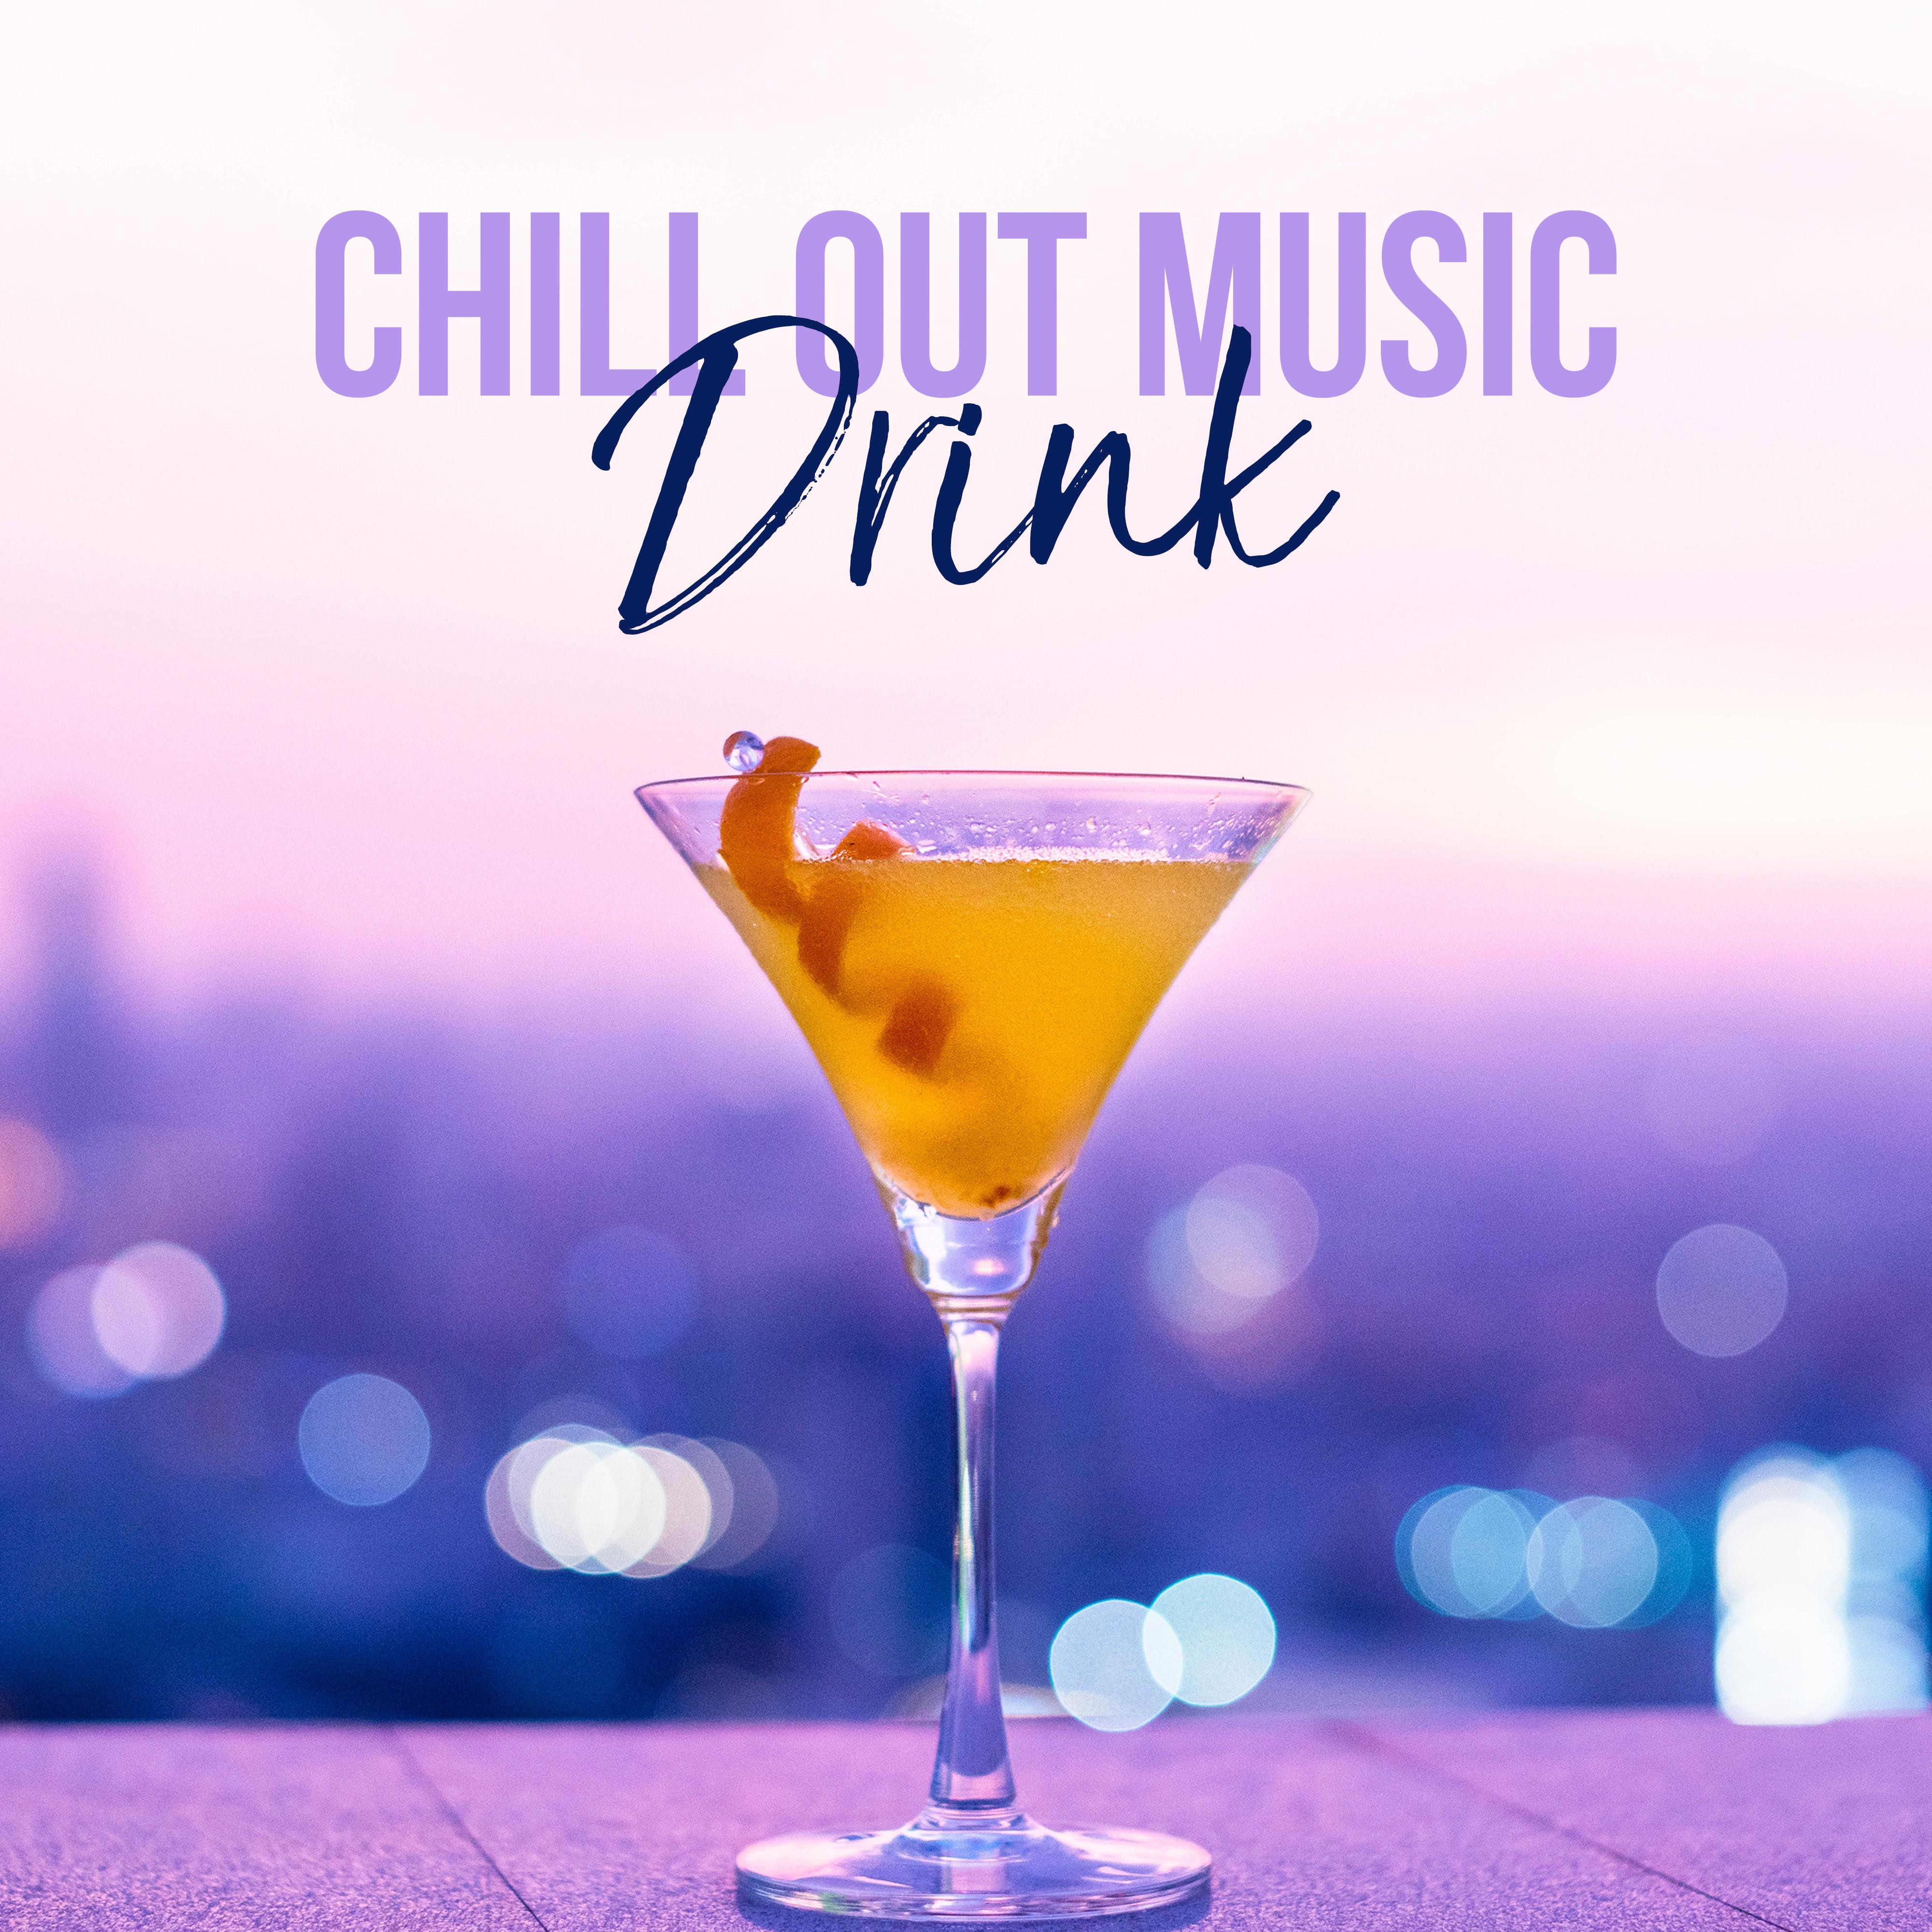 Chill Out Music: Drink